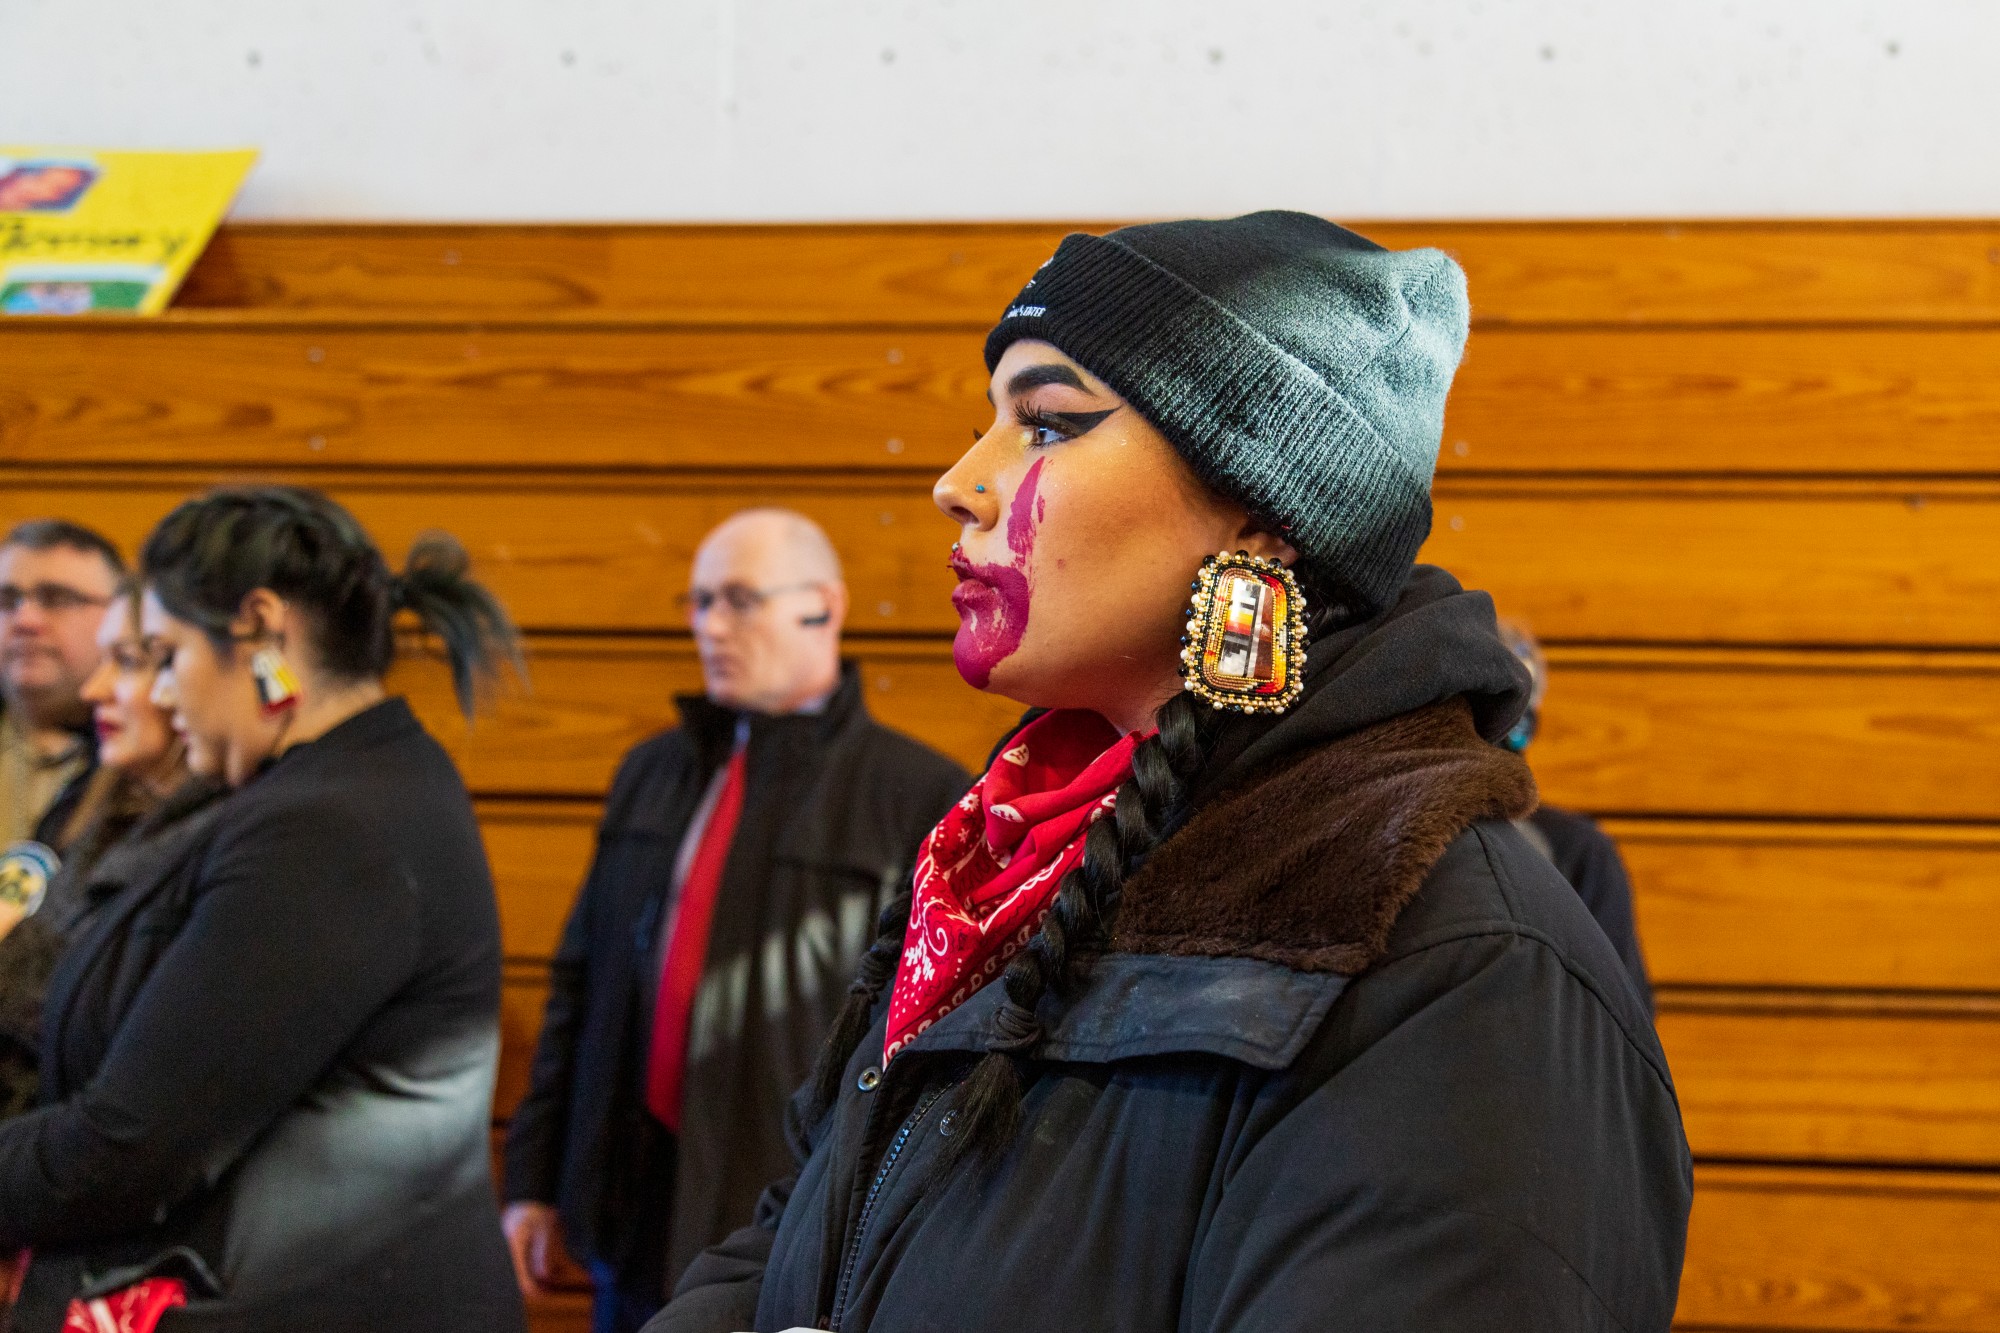 Attendee Kennedy German observes the proceedings at the Minneapolis American Indian Center on Friday, Feb. 14.  The event was held in honor of missing and murdered Indigenous women and to raise awareness of other issues in the community.